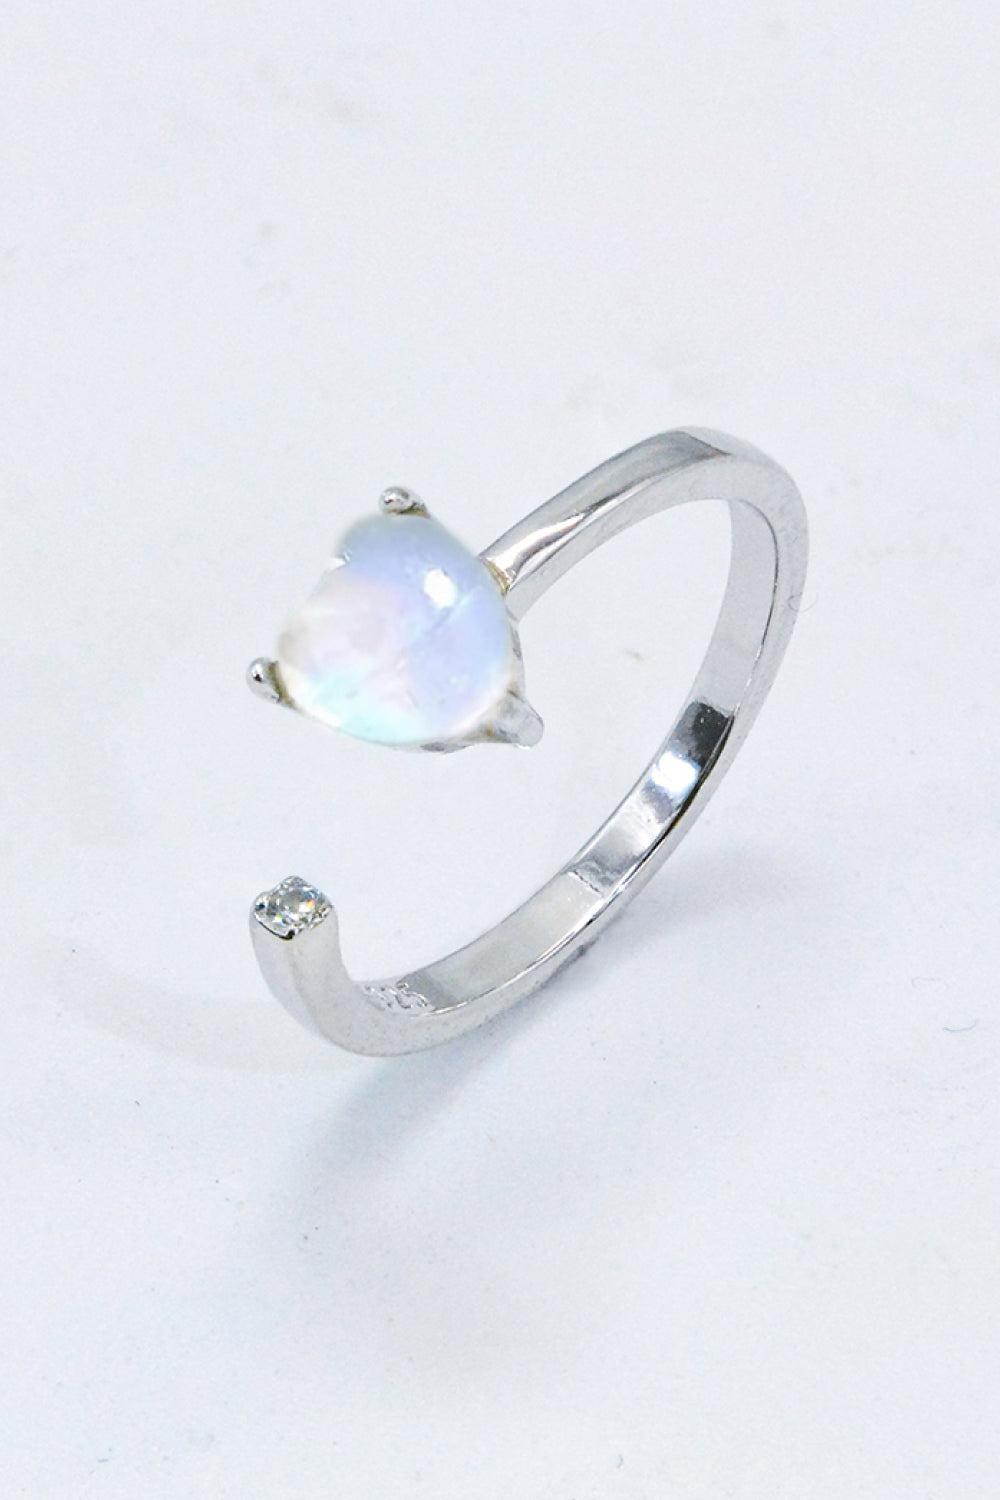 Inlaid Moonstone Heart Adjustable Open Ring BLUE ZONE PLANET